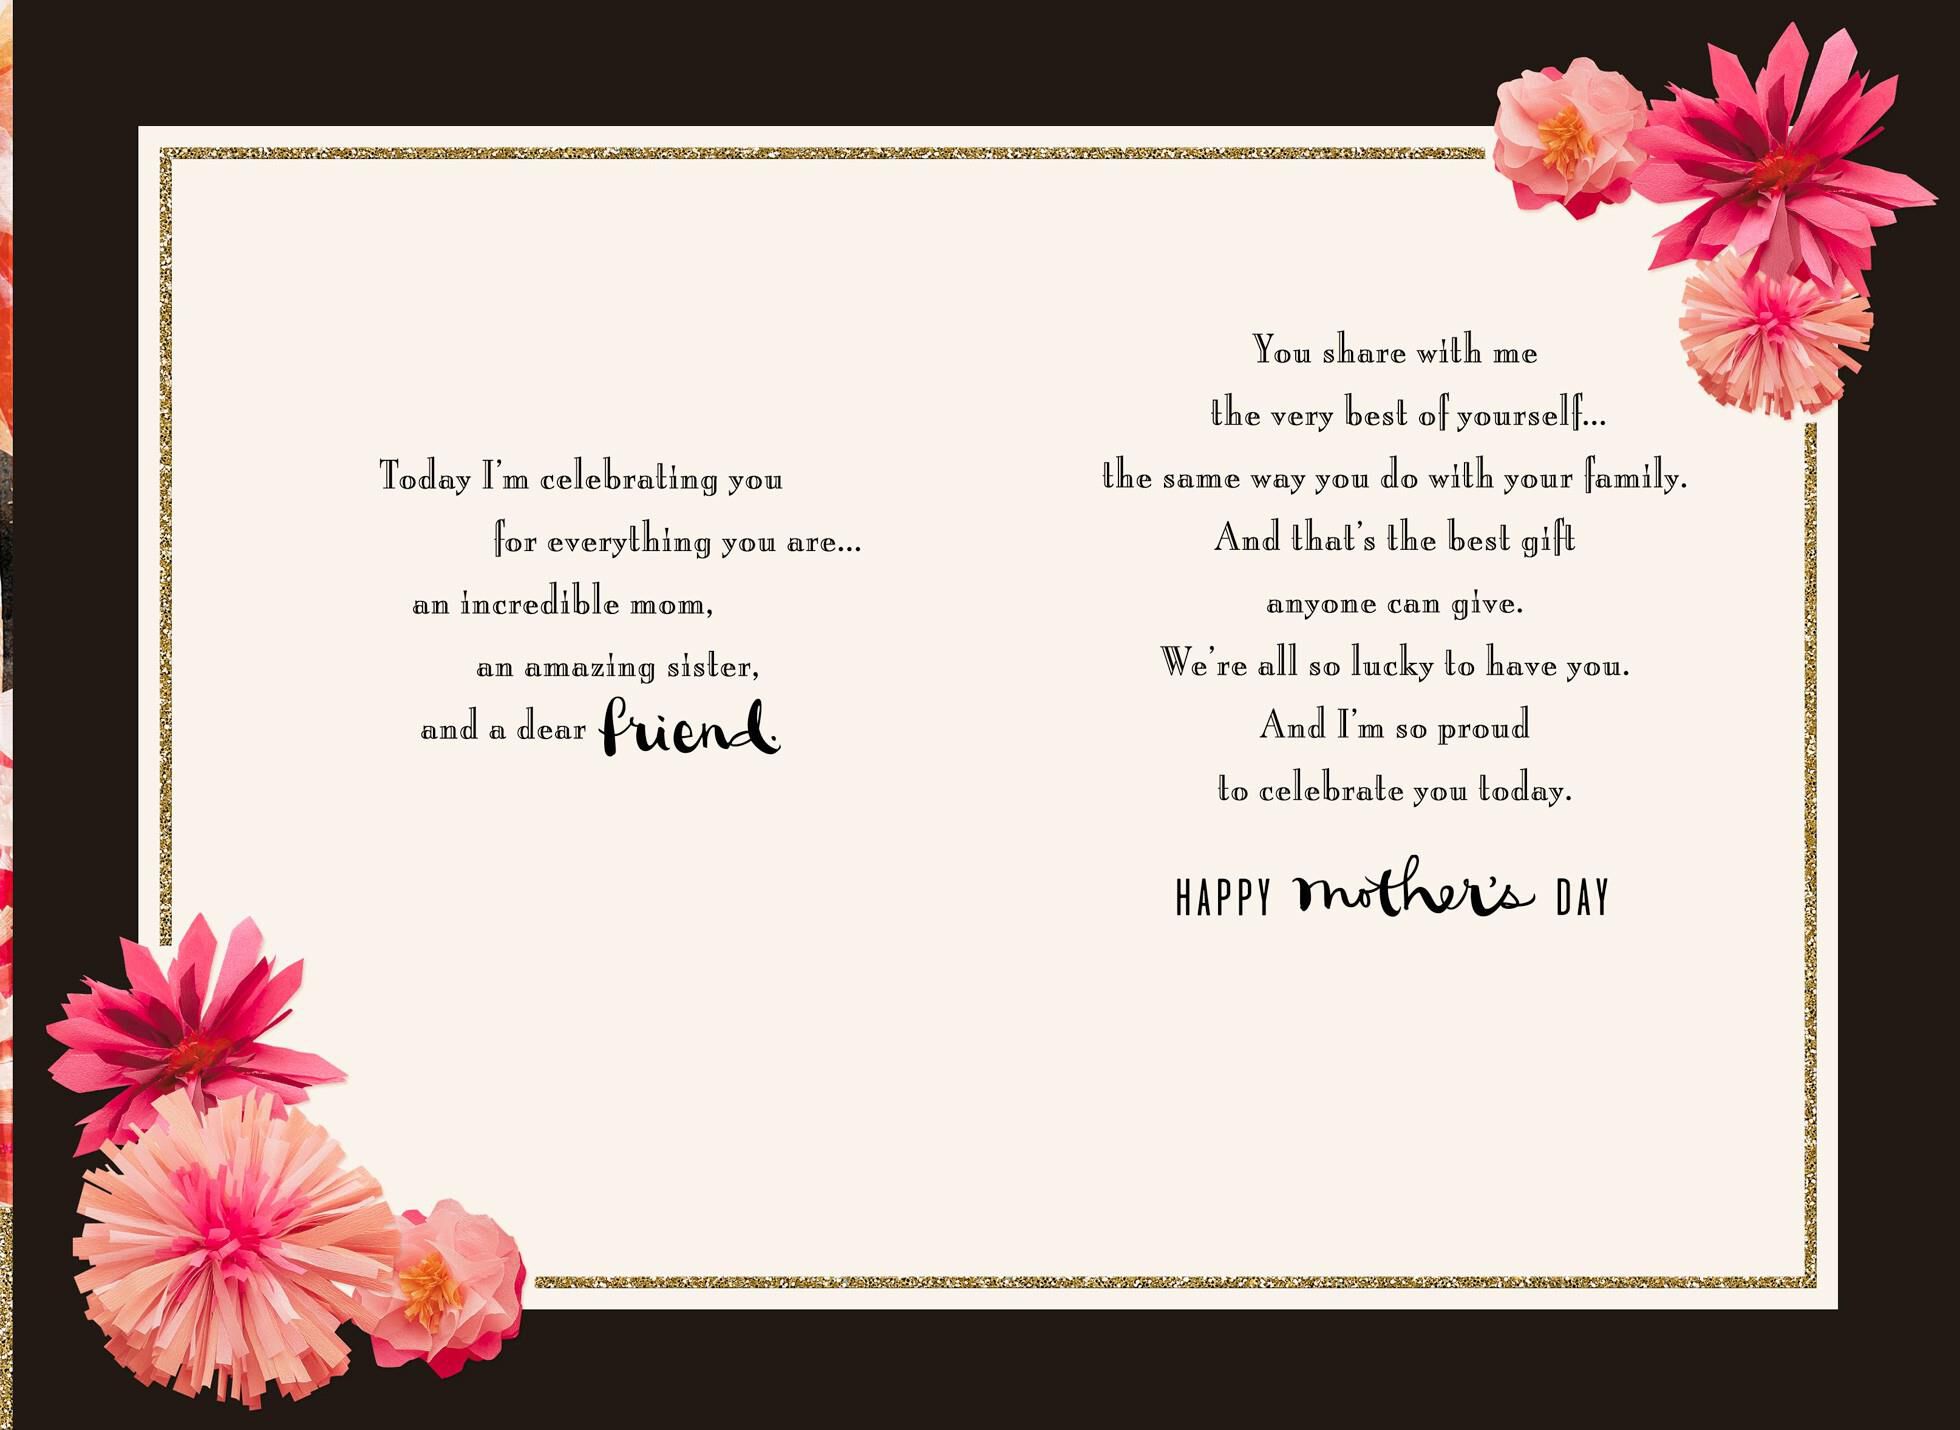 celebrating-my-sister-on-mother-s-day-card-greeting-cards-hallmark